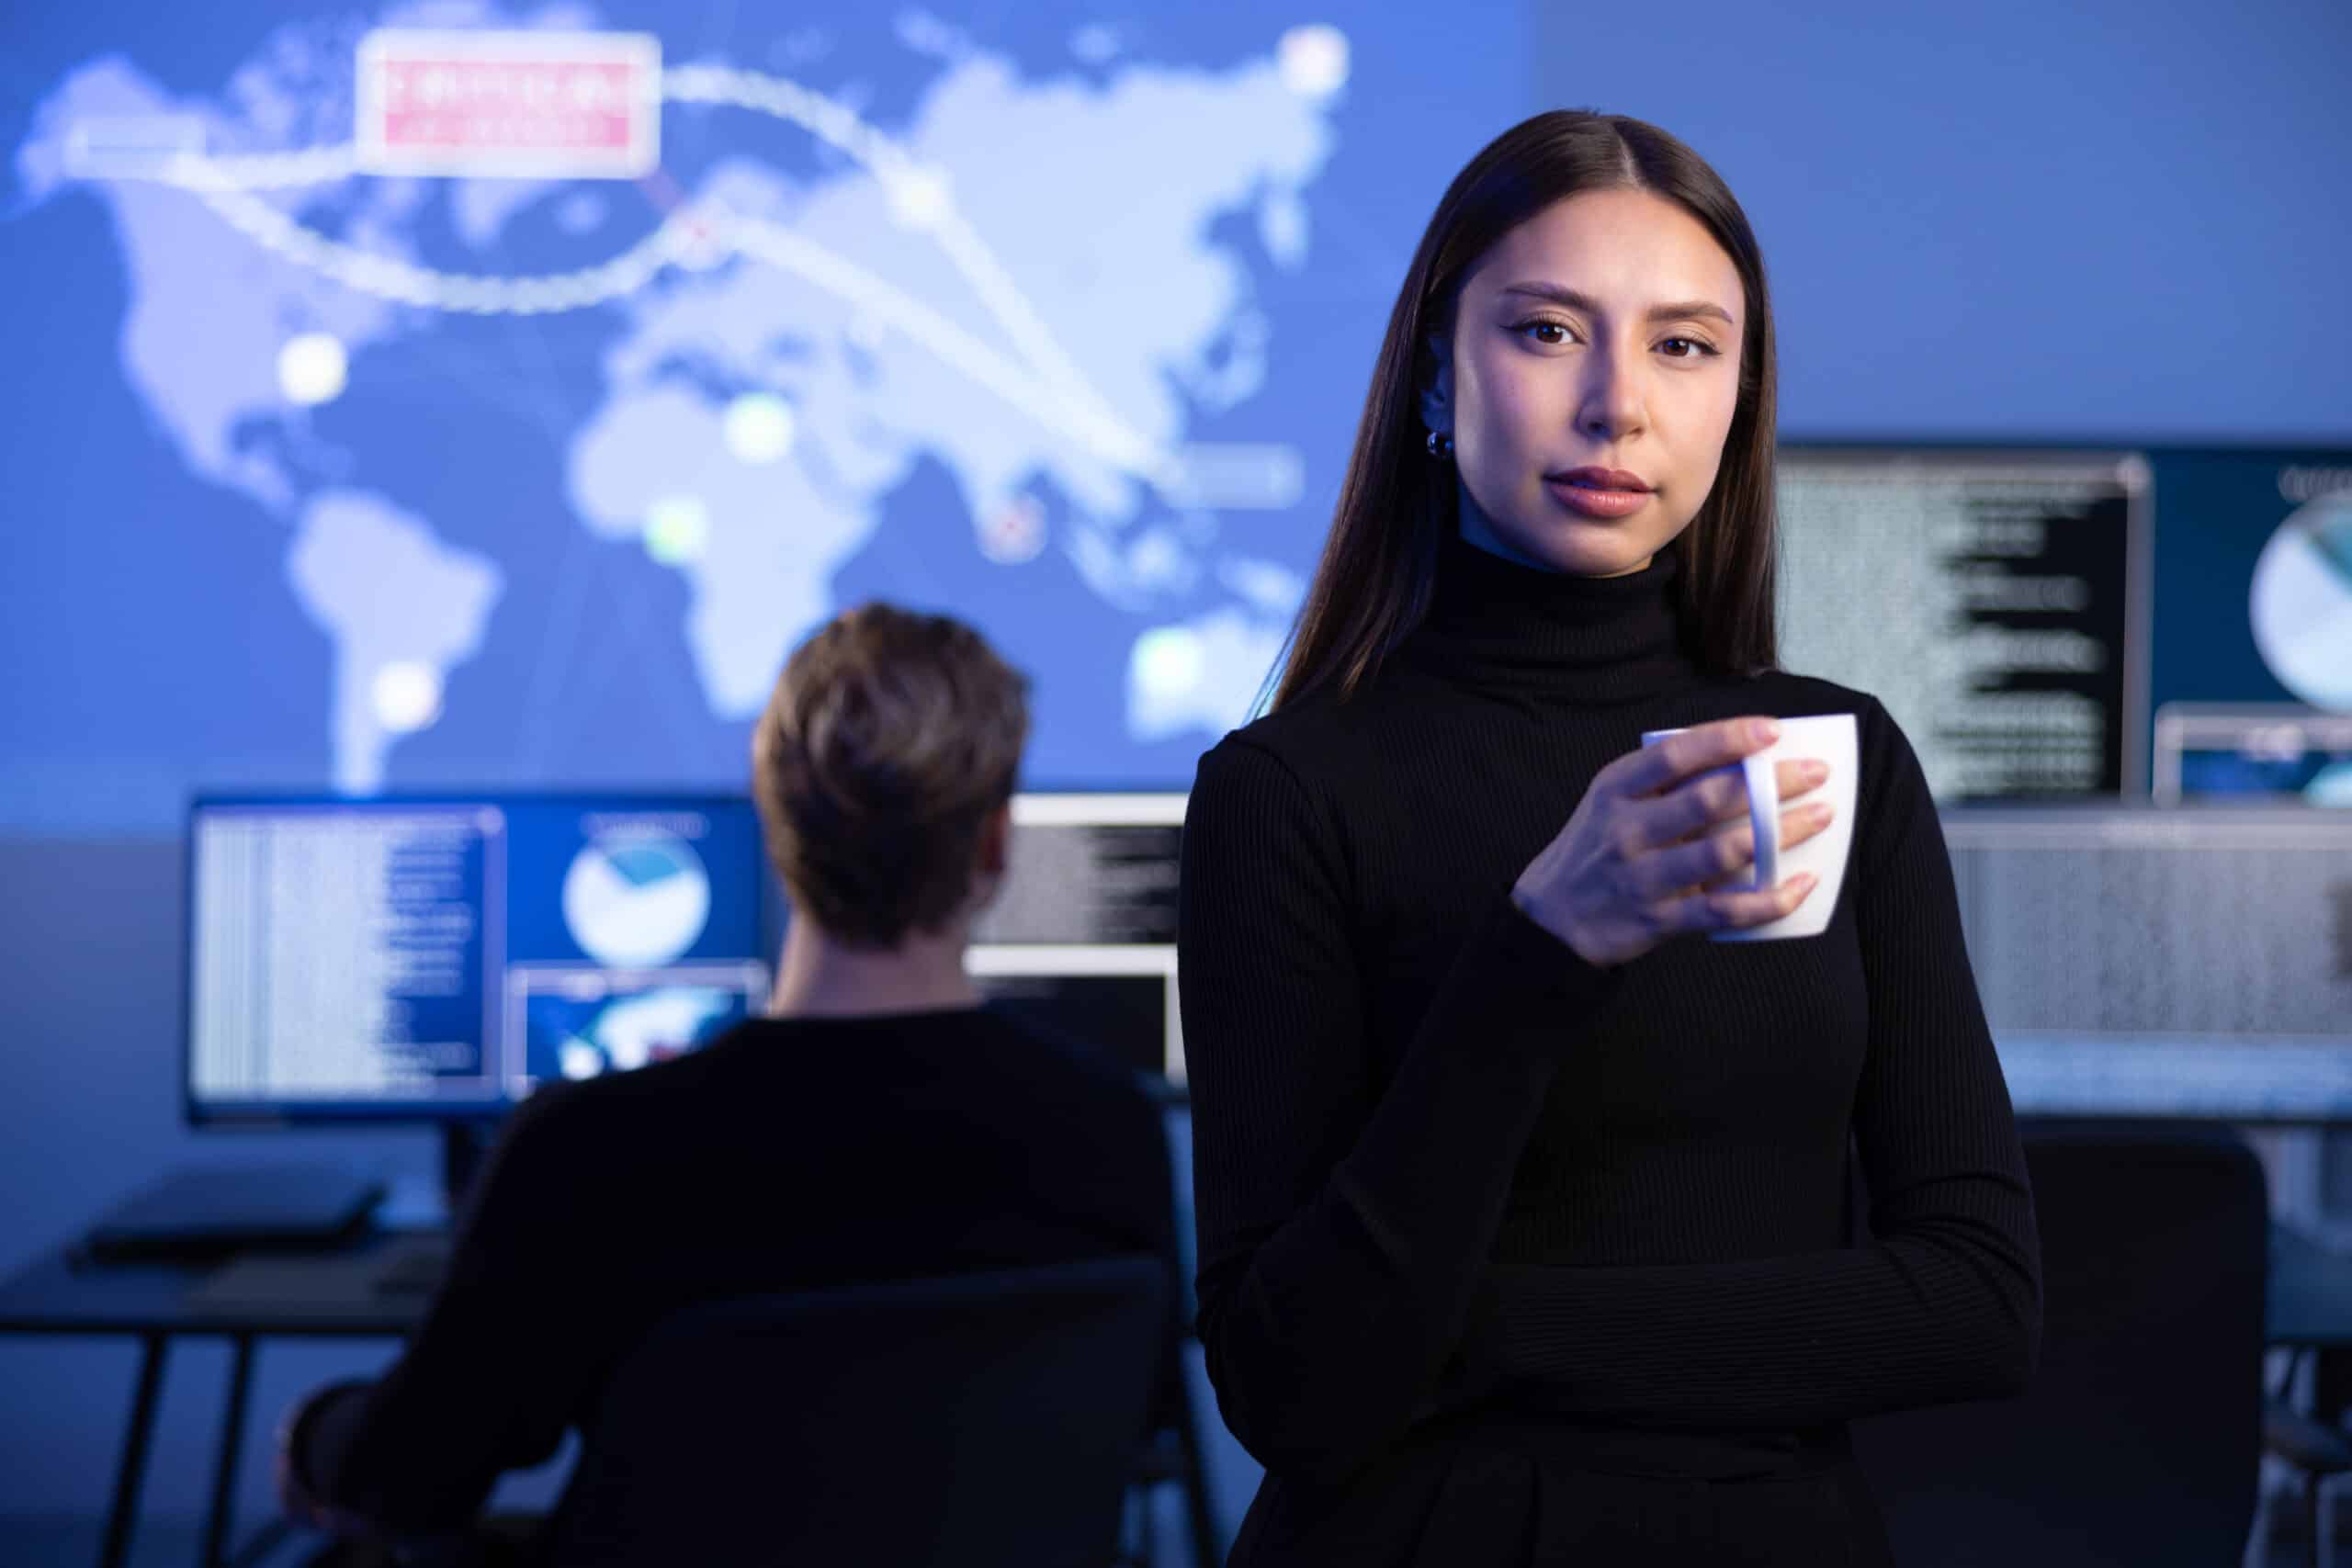 Professional Female IT Consultant holding coffee cup in large Cyber Security Operations Center SOC